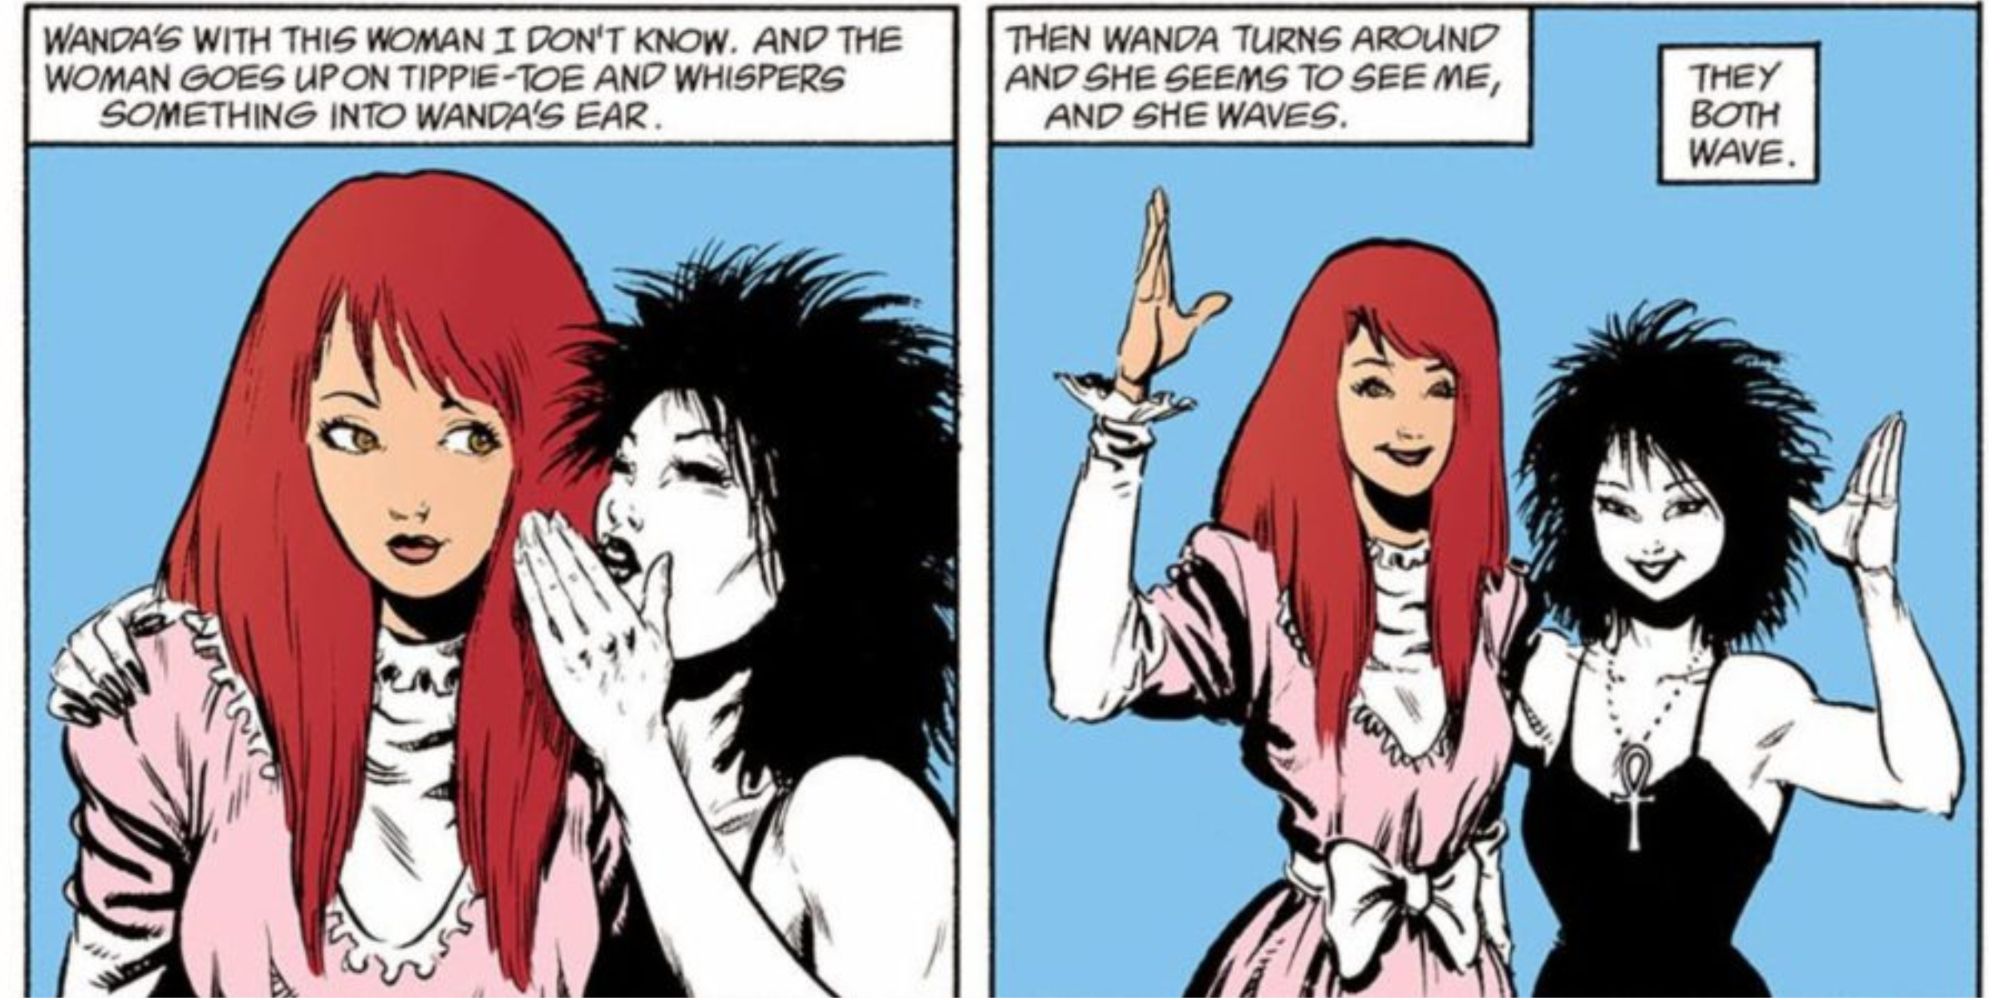 The trans character, Wanda, in The Sandman comic issue "A Game Of You"